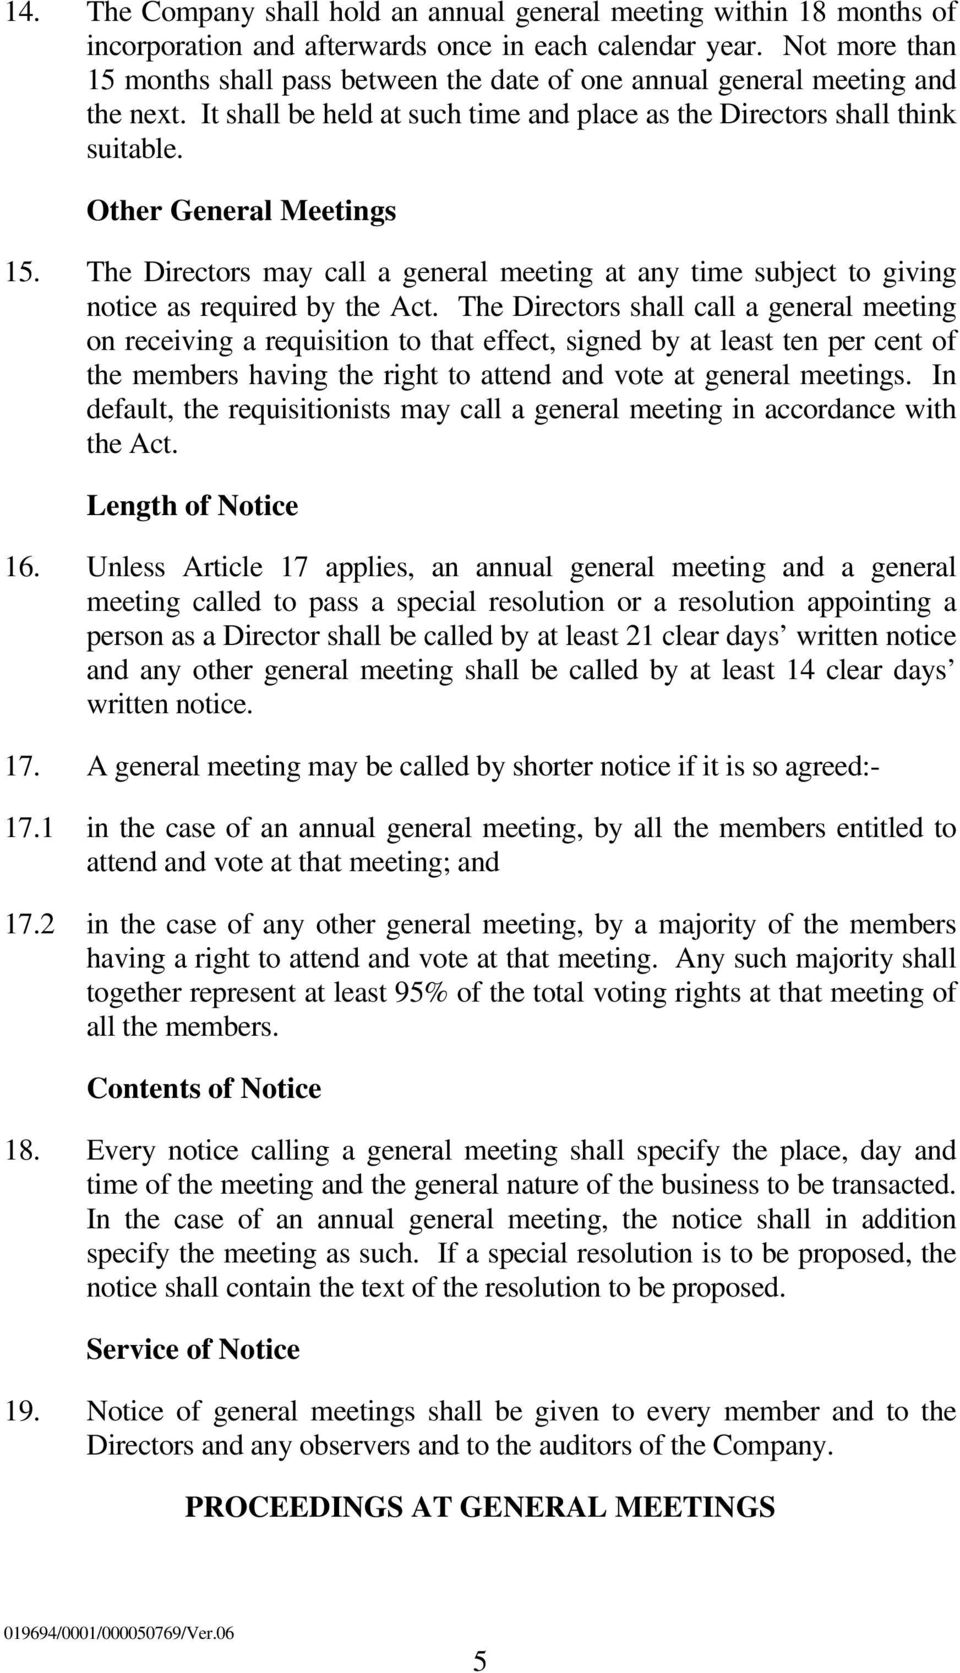 Other General Meetings 15. The Directors may call a general meeting at any time subject to giving notice as required by the Act.